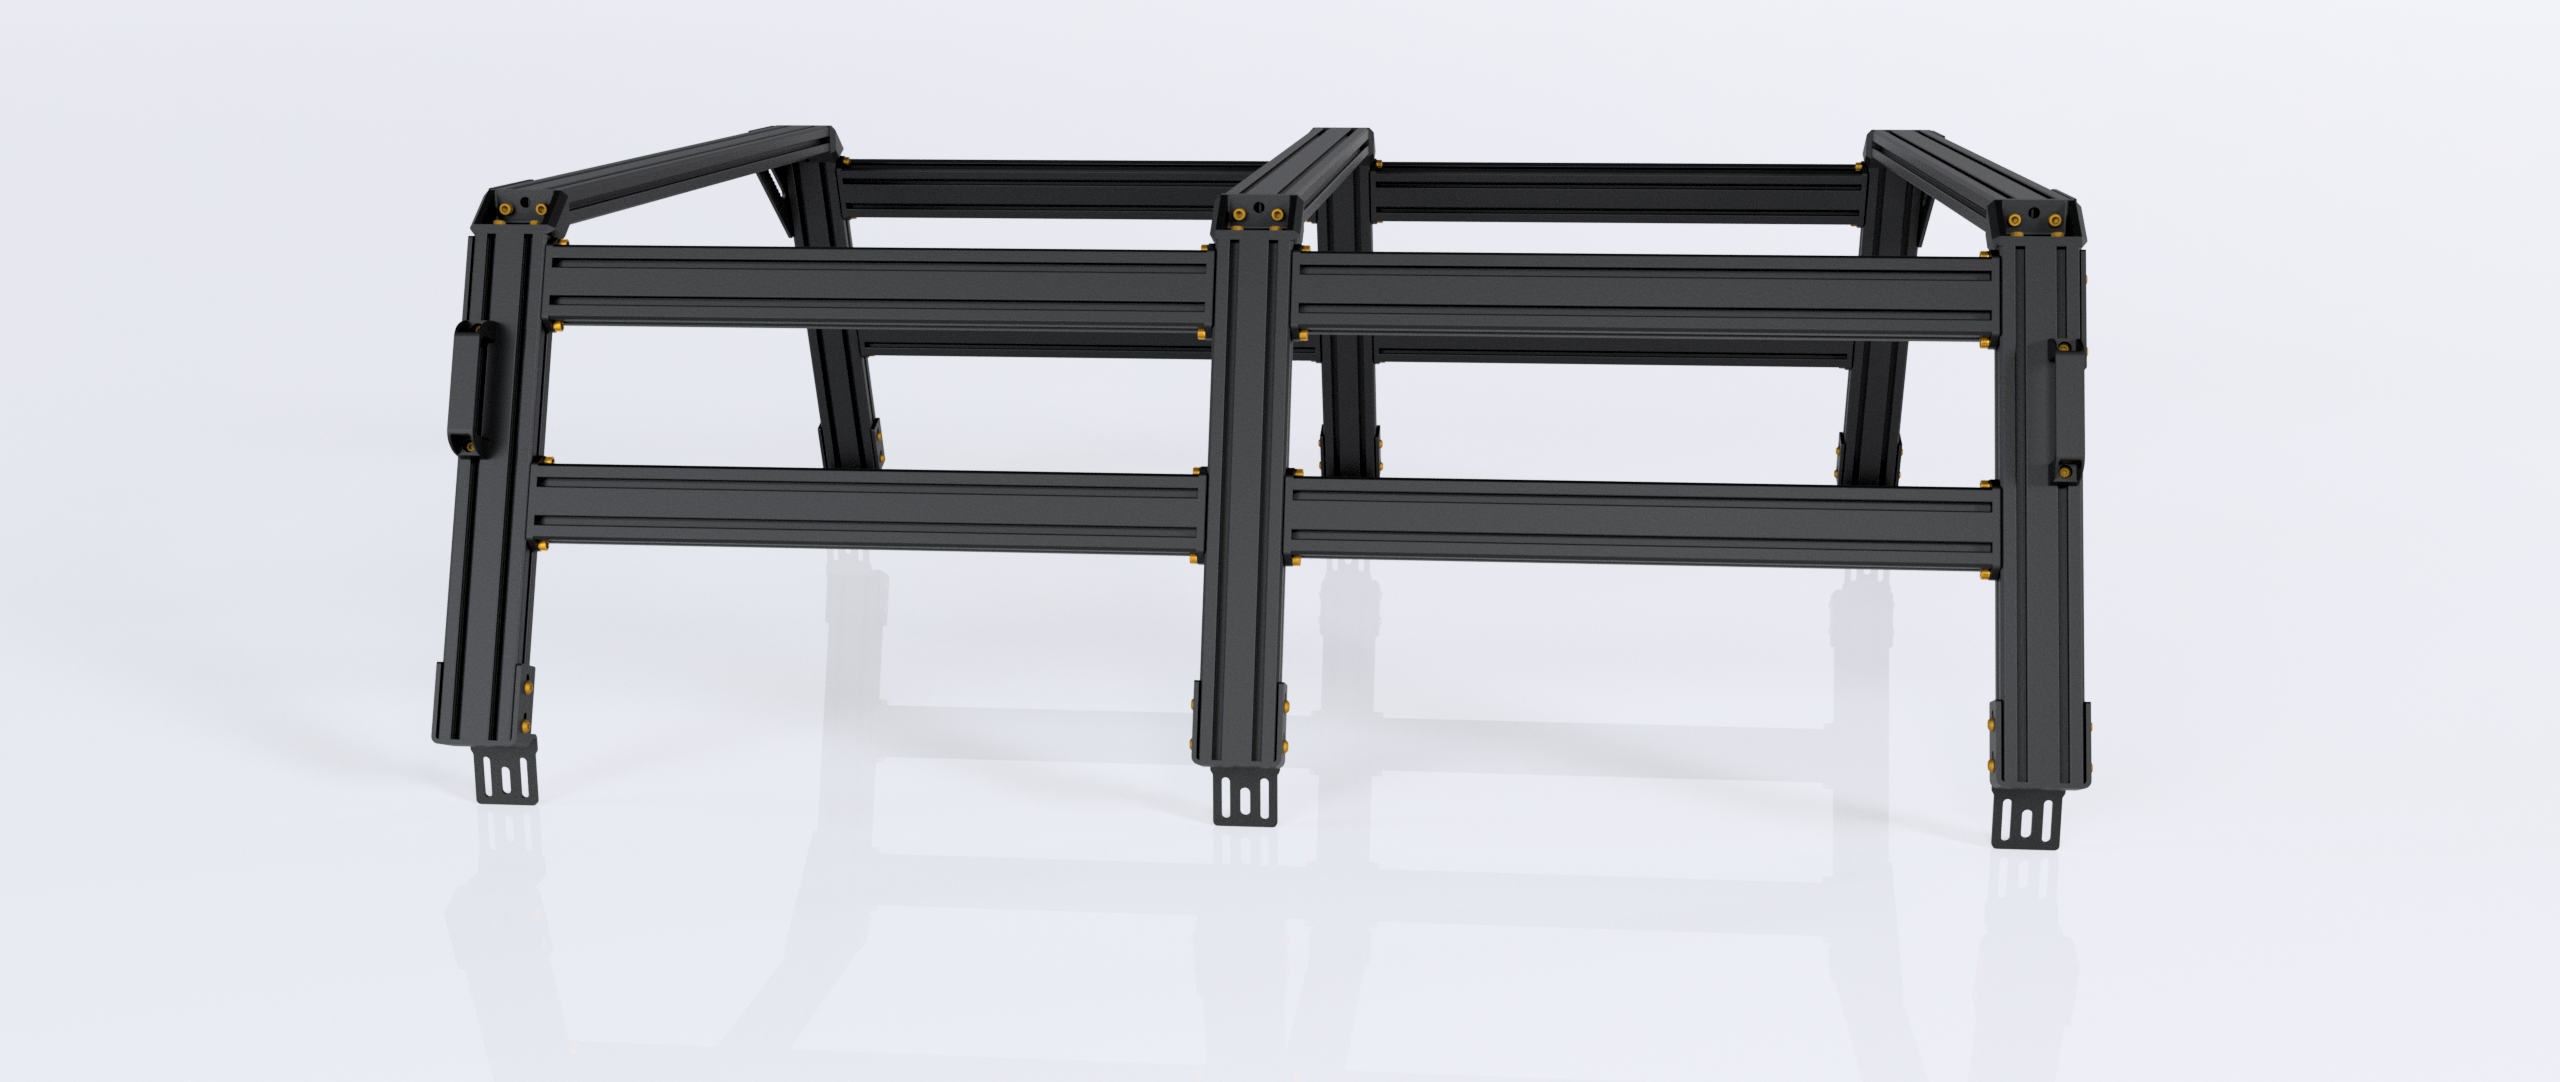 XTR3 Bed Rack for Ford F-150